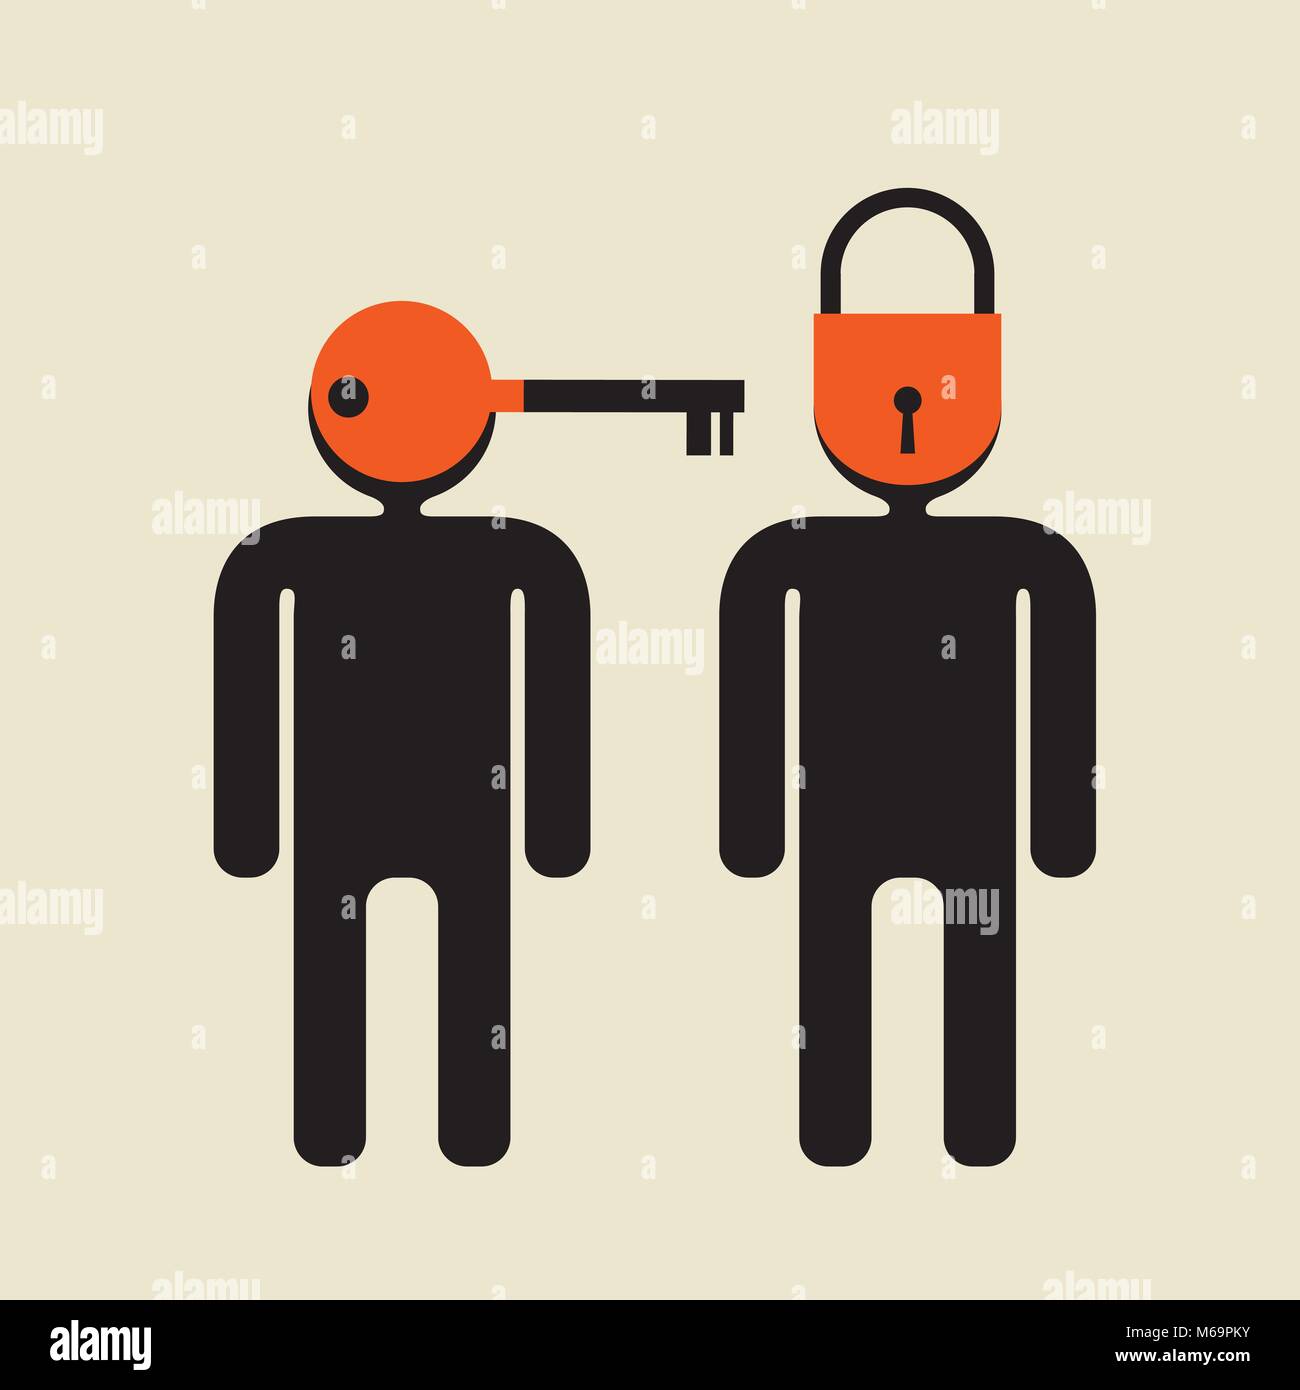 introvert vs   extrovert   or personal key, individual approach Stock Vector